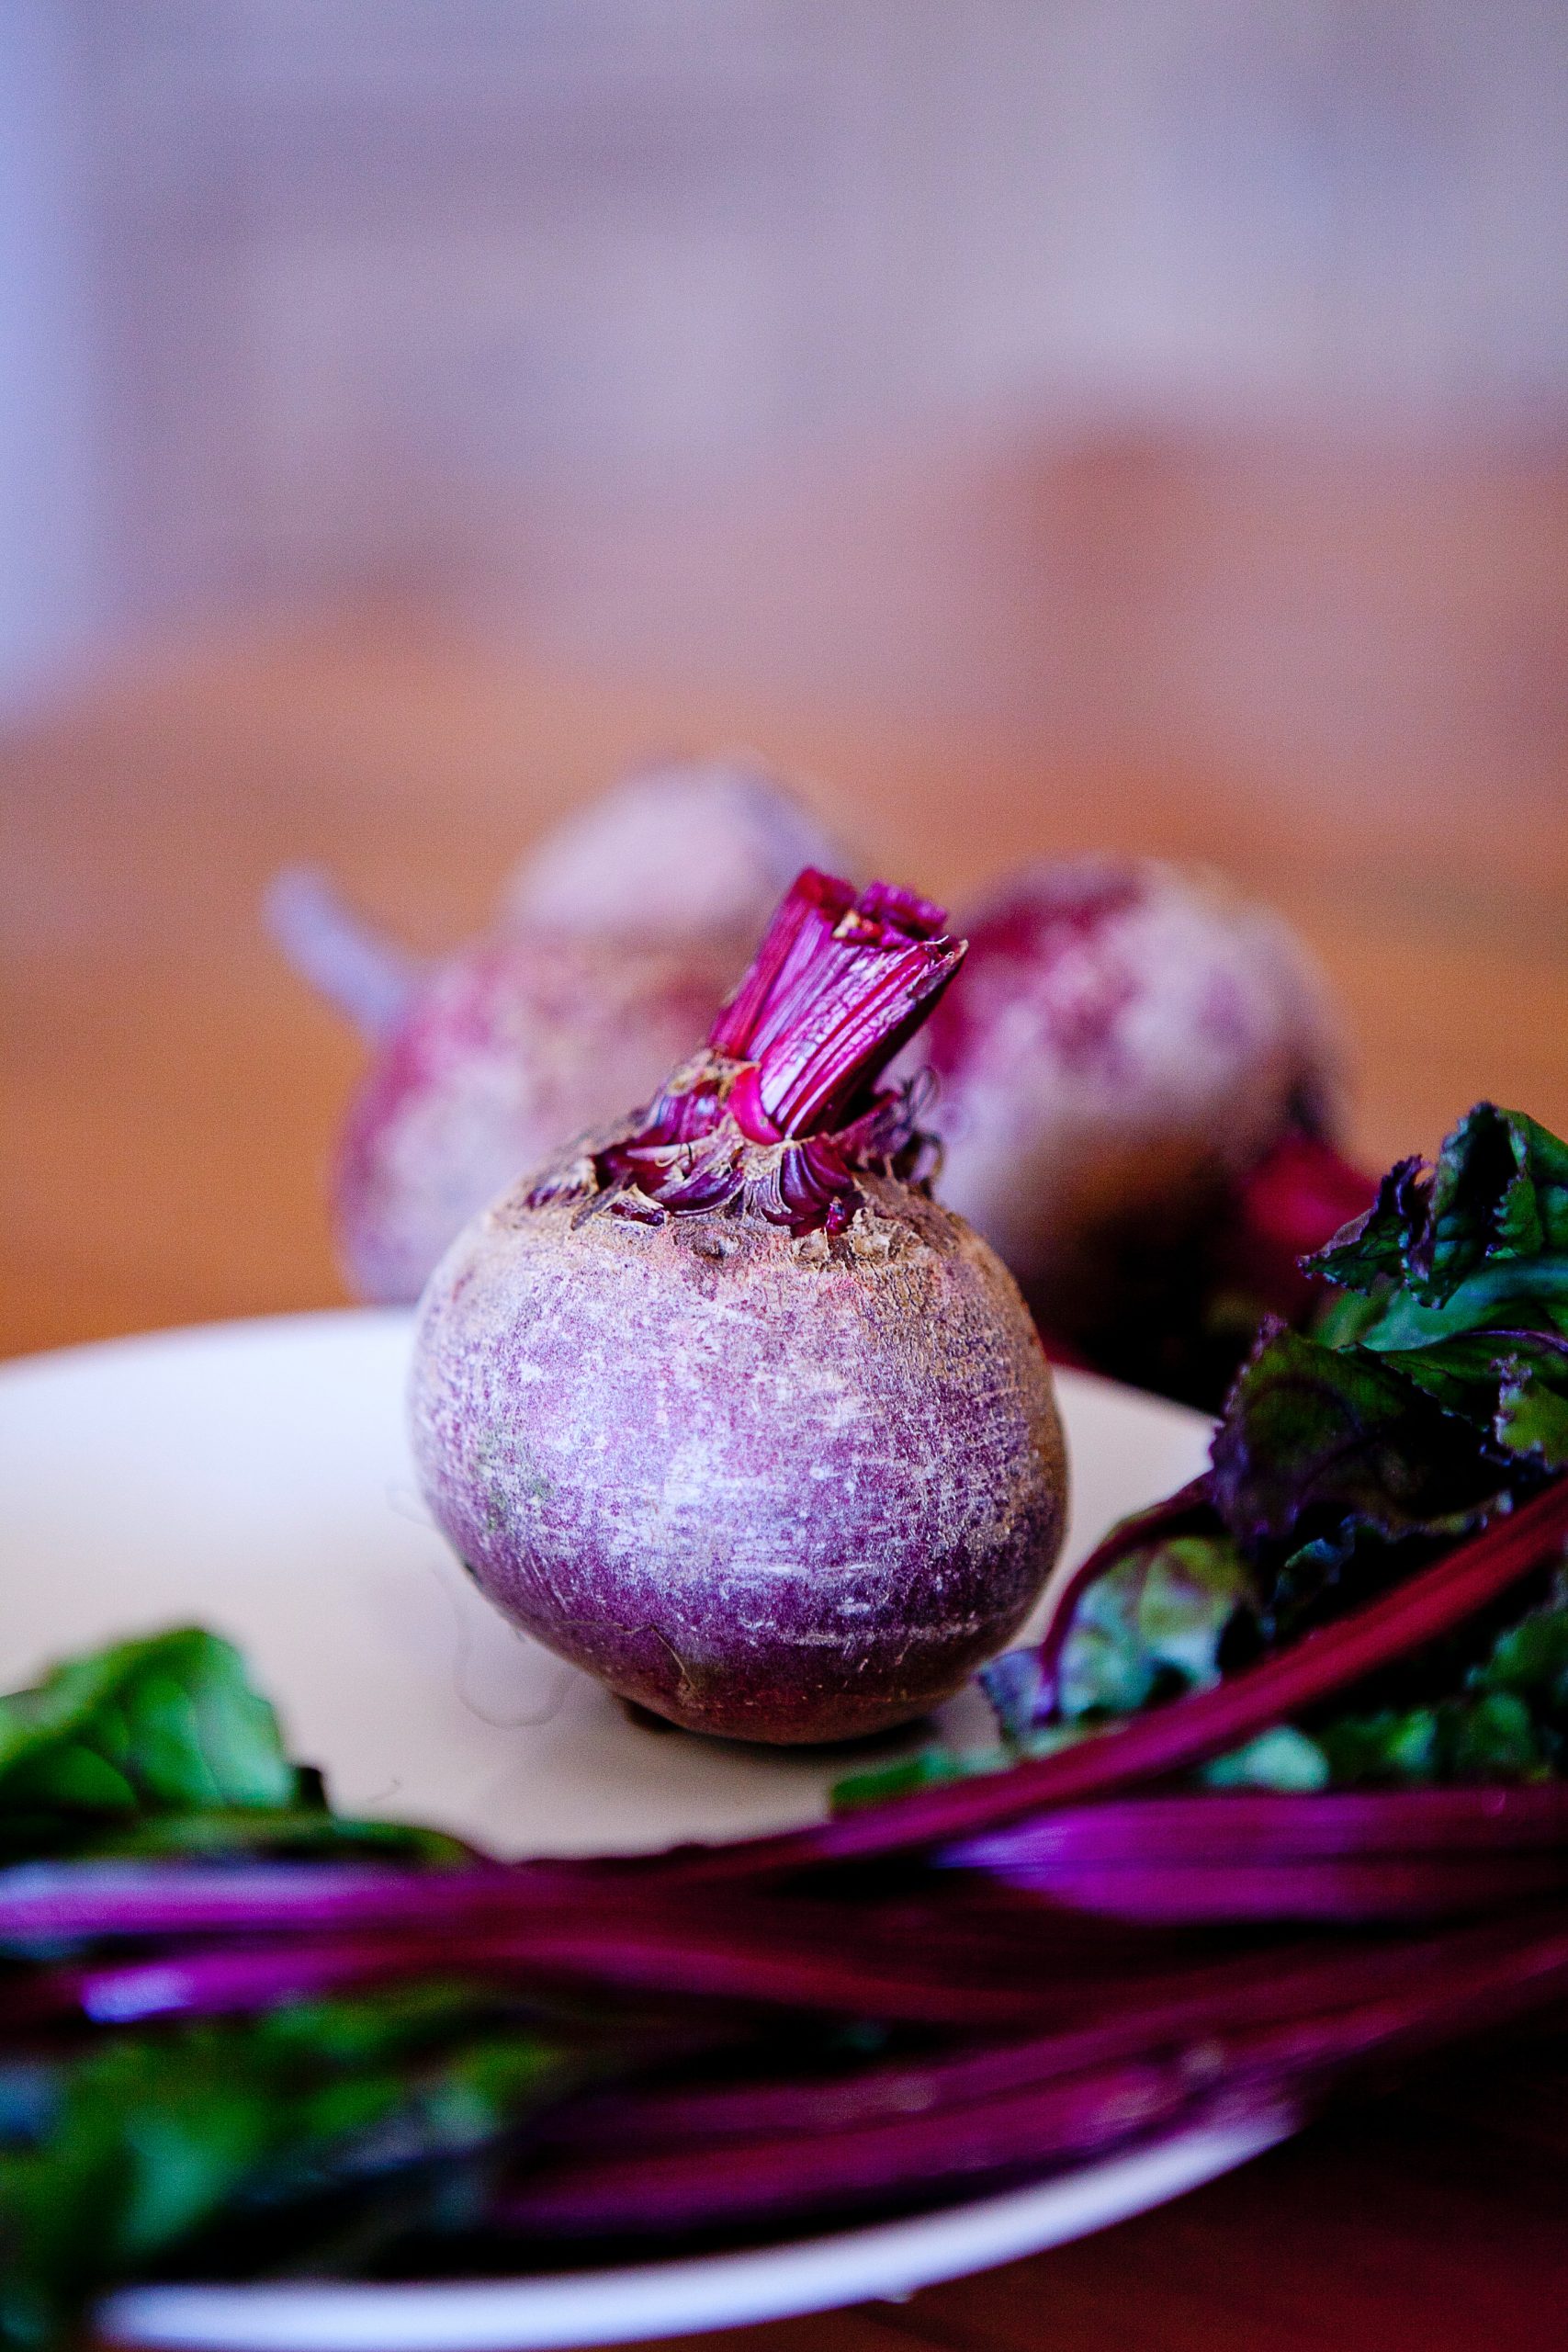 Is A Beet A Fruit Or Vegetable?